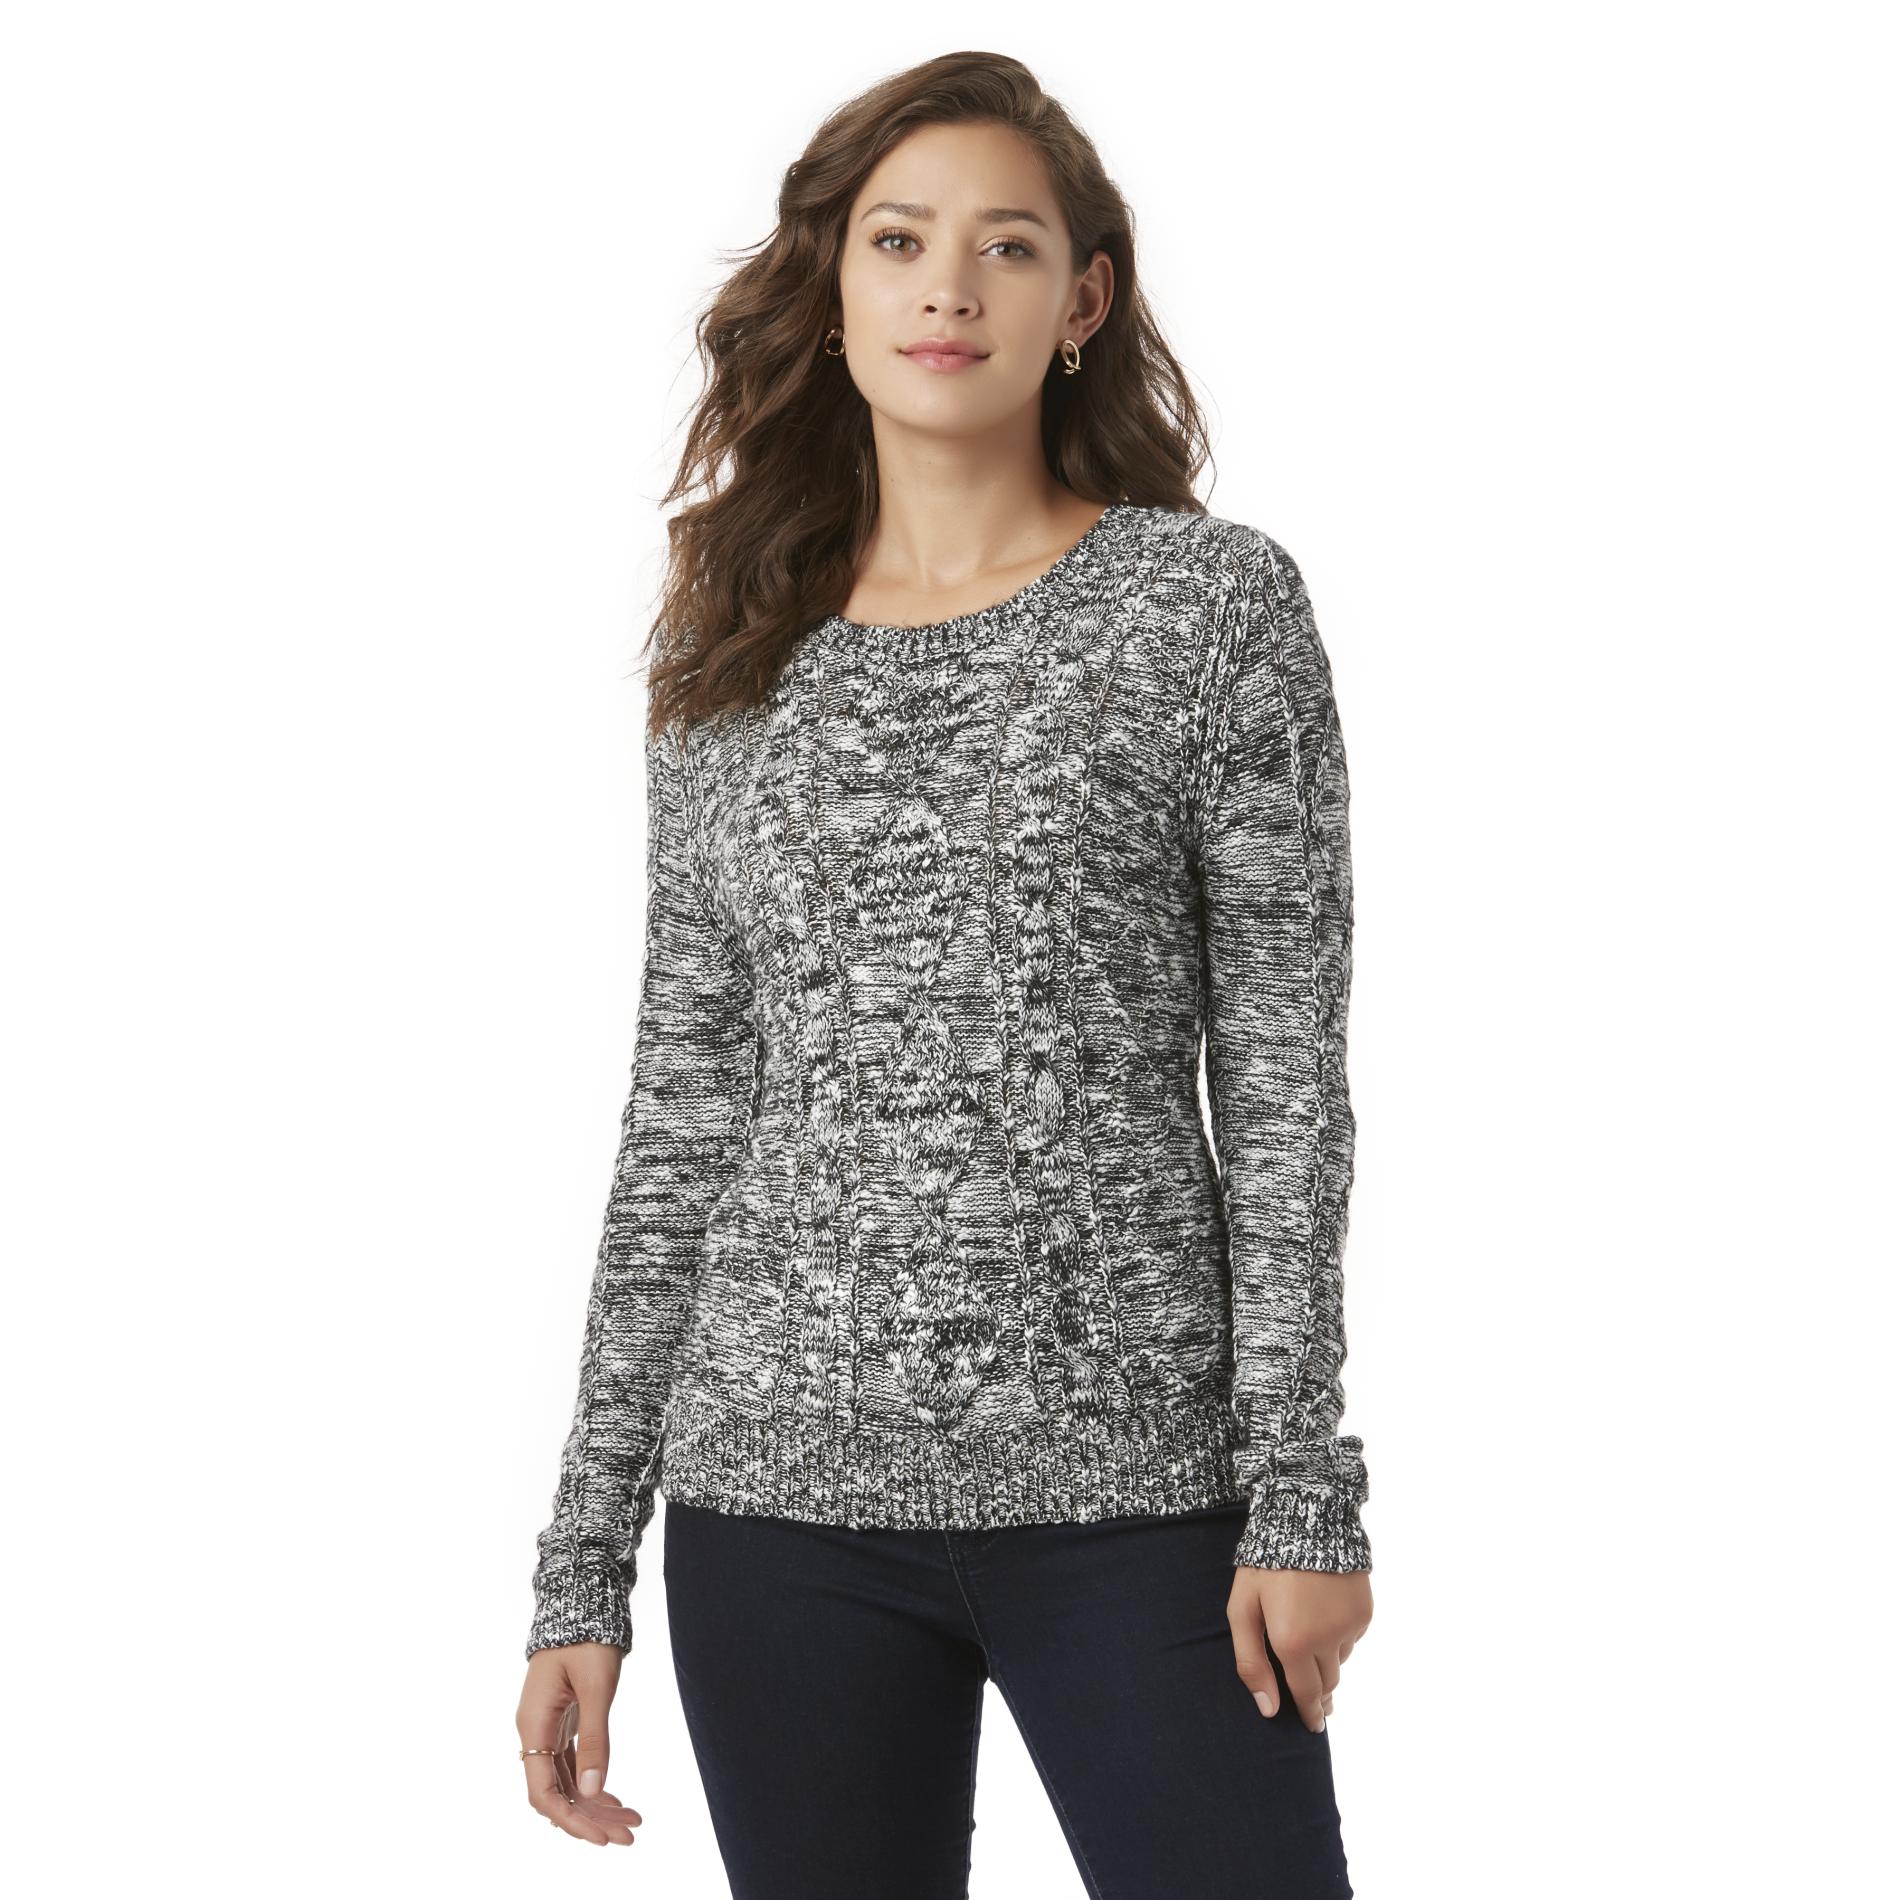 Metaphor Women's Cable Knit Sweater - Space Dyed